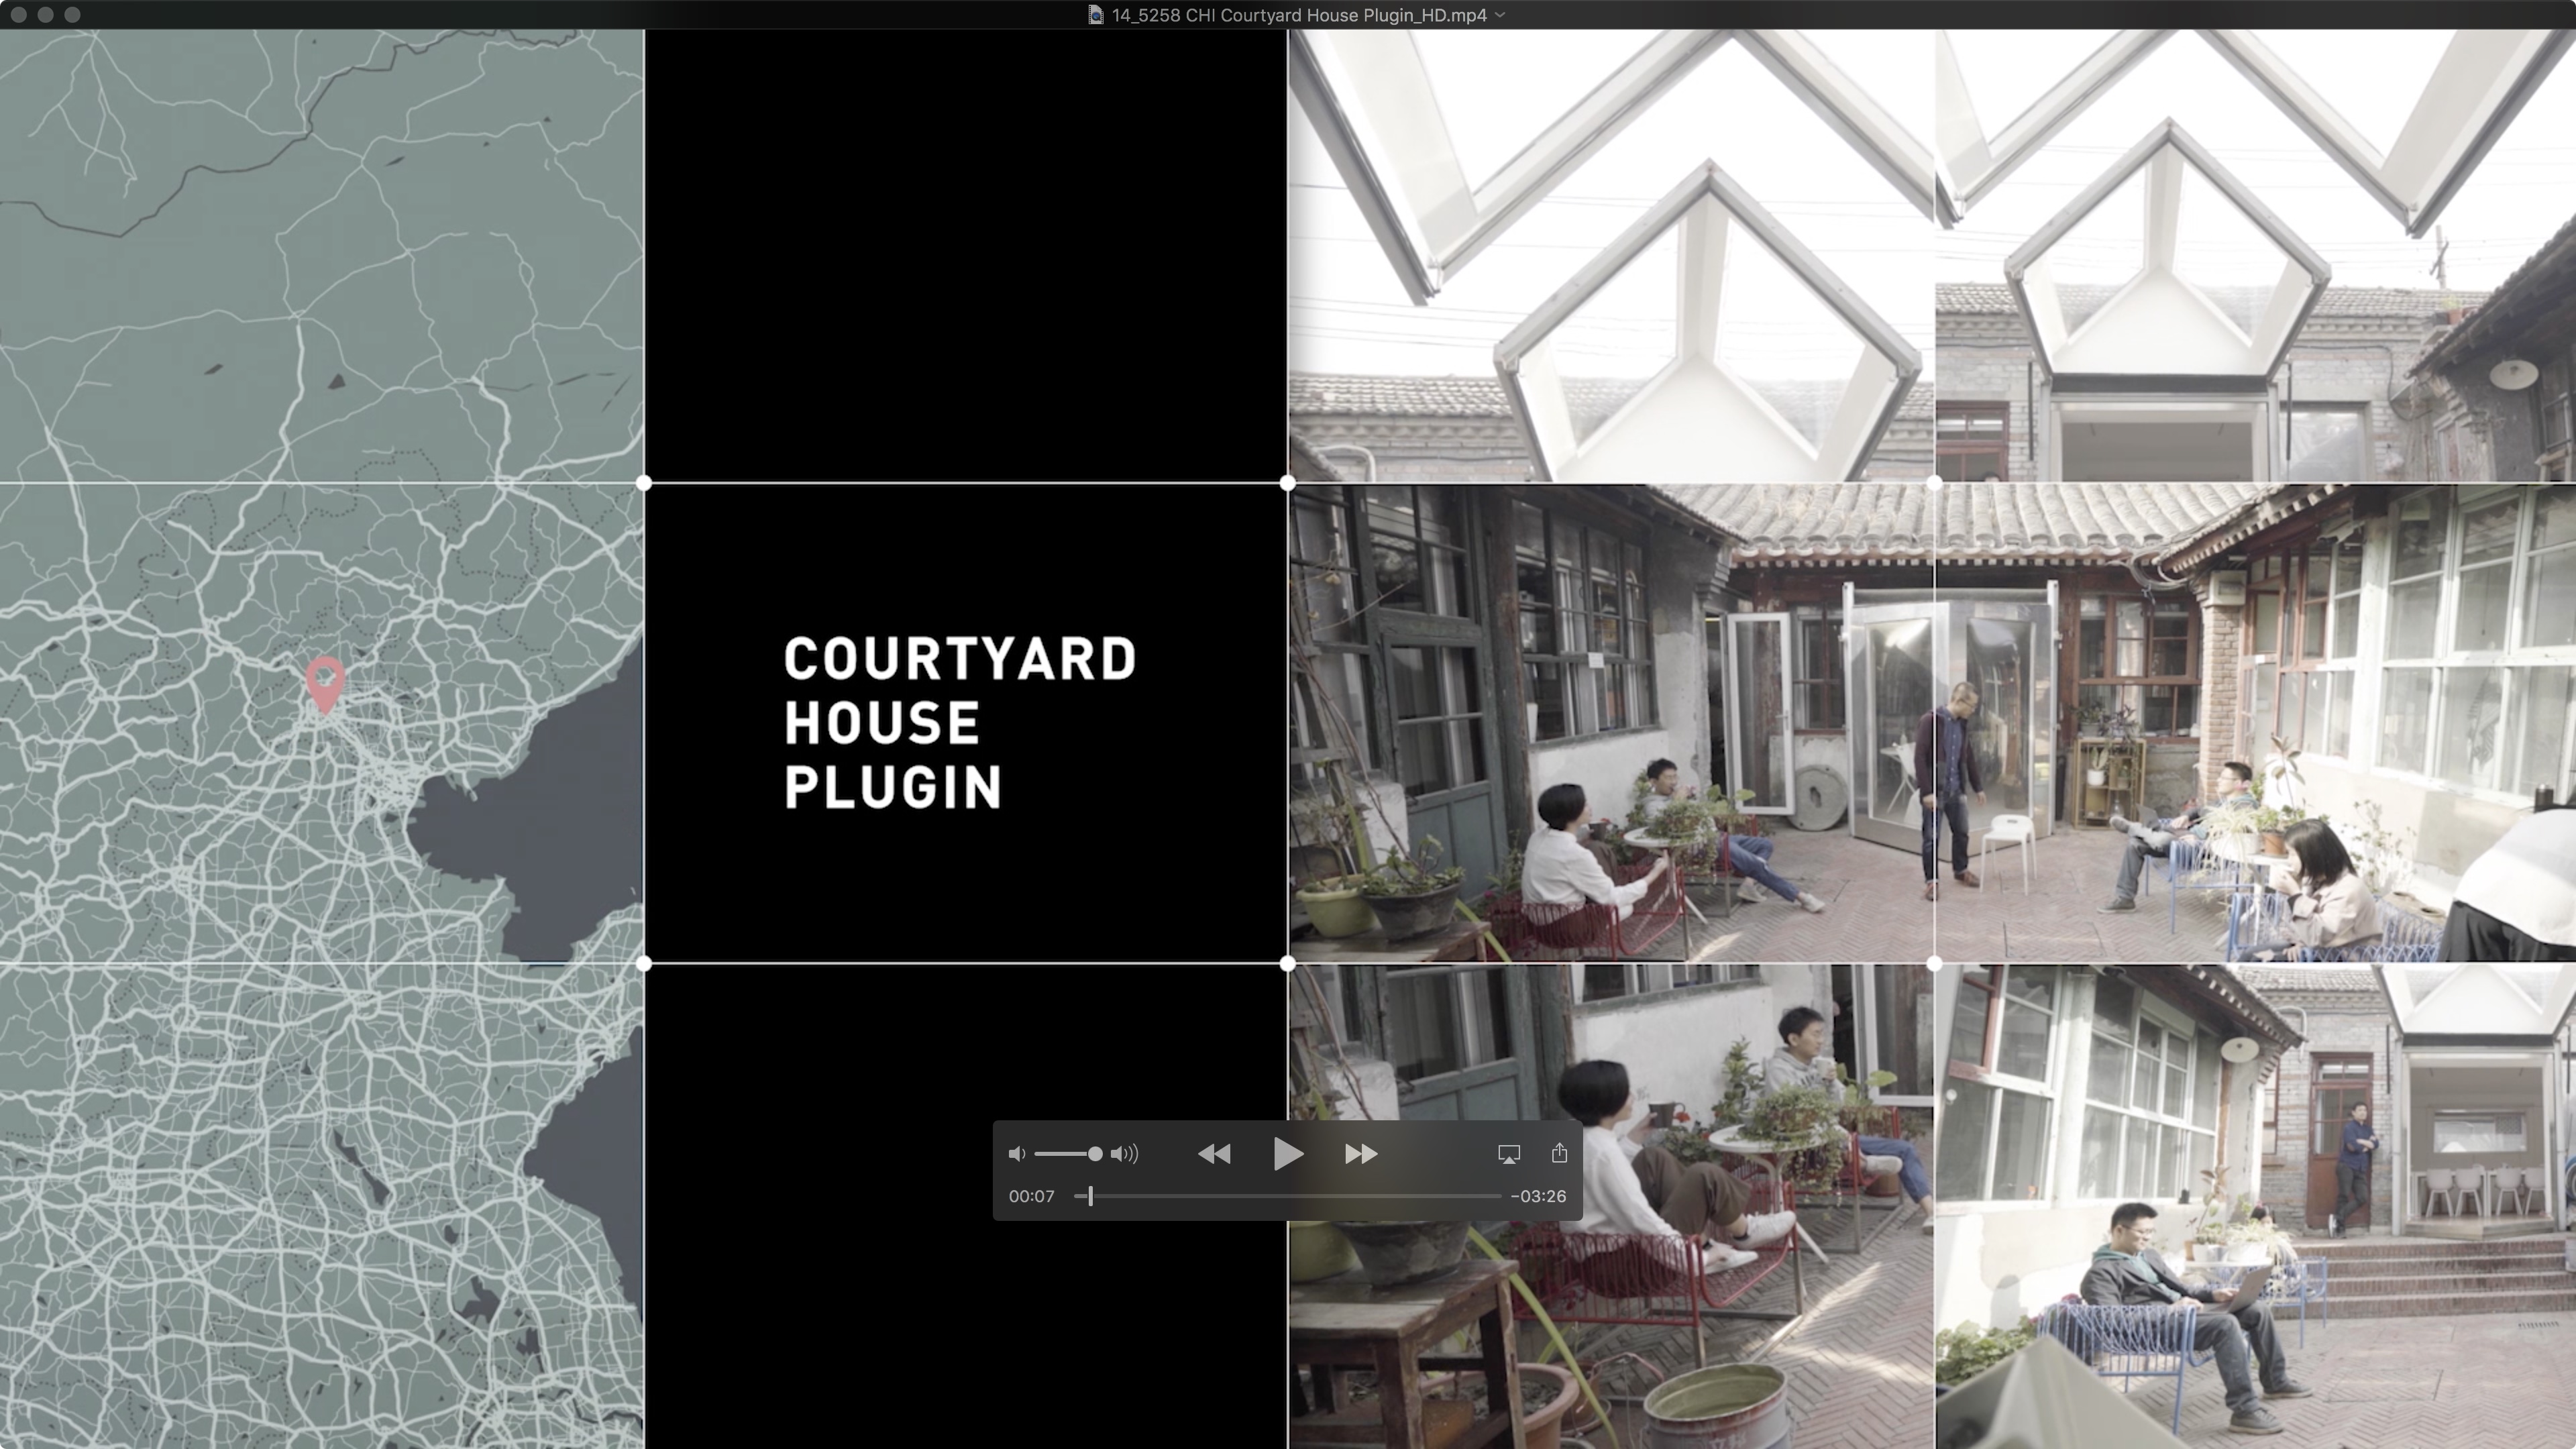 Video Introduction to the Courtyard House Plugin